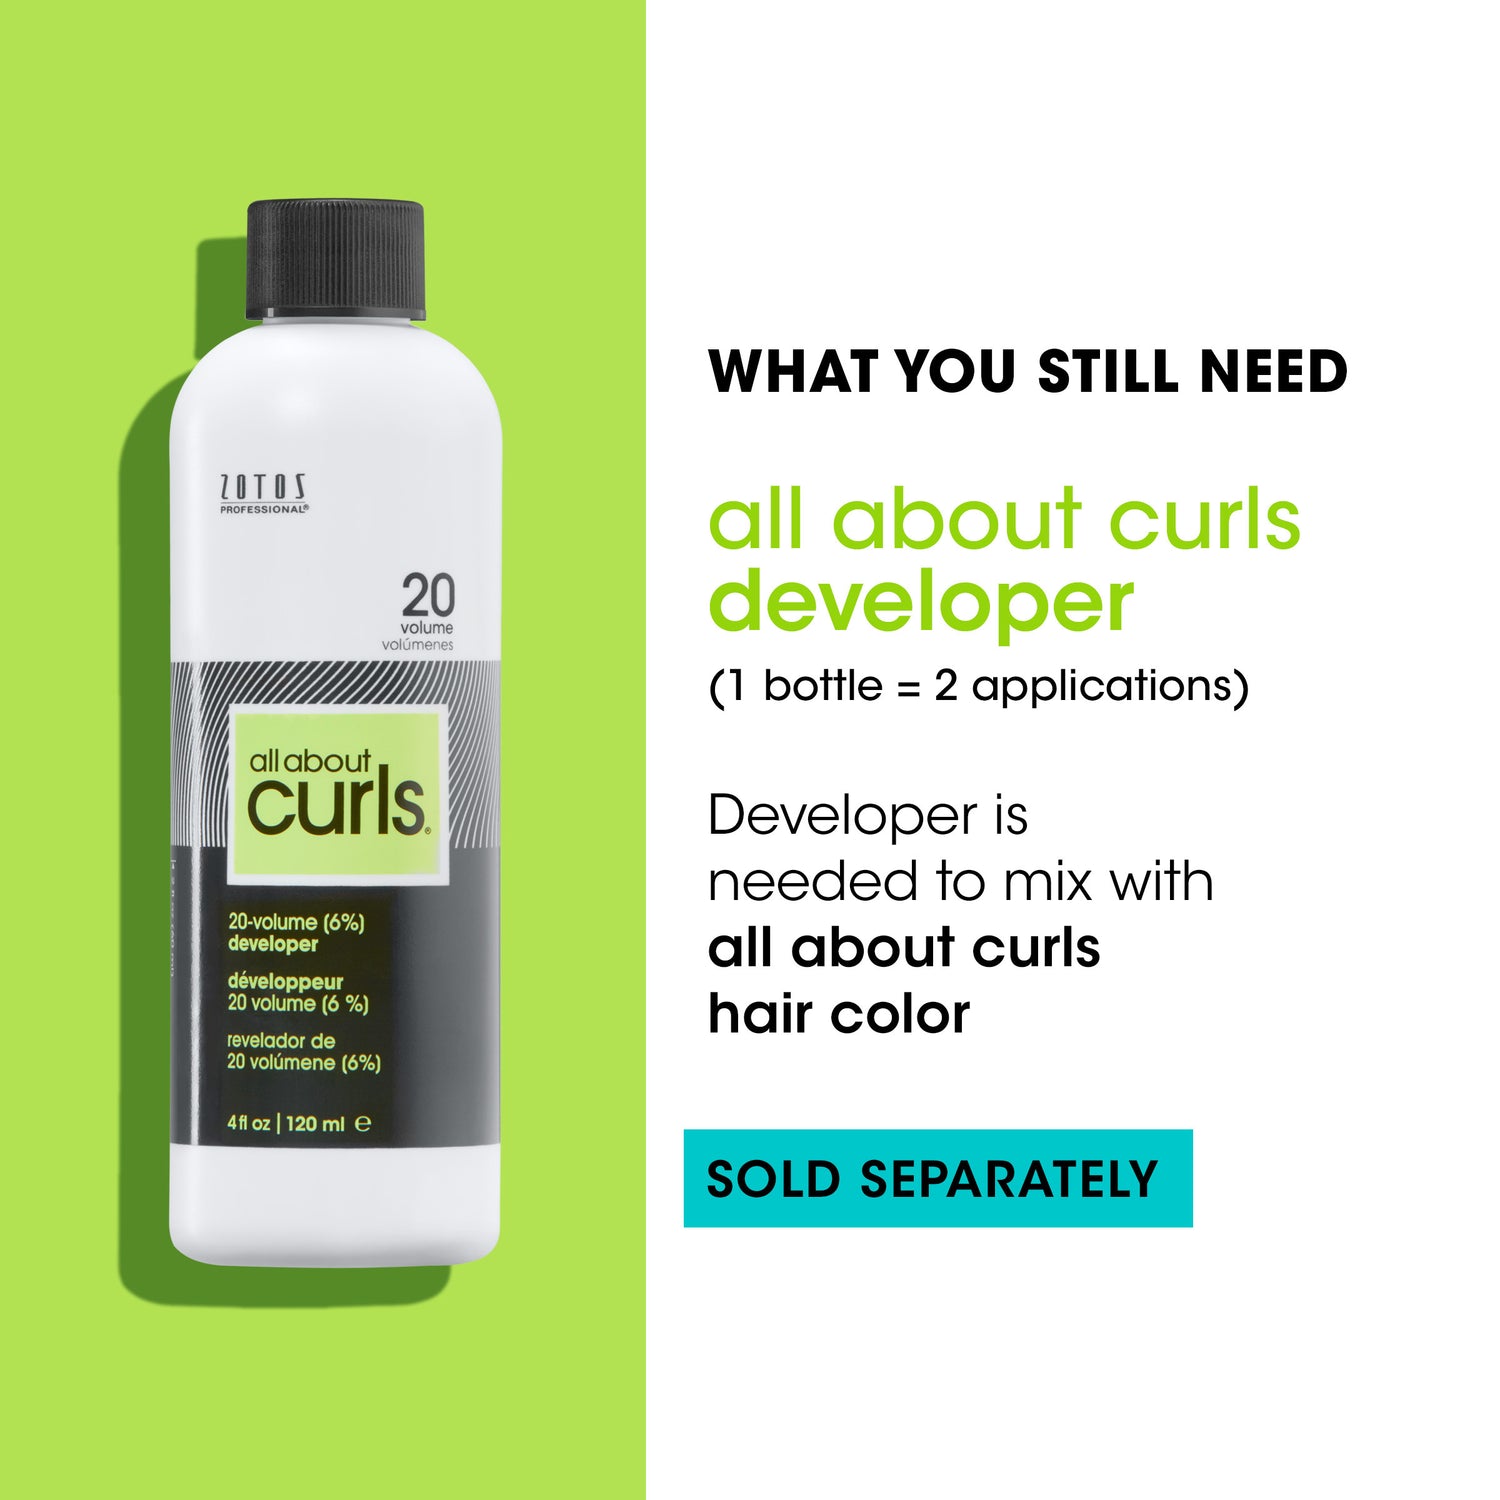 All About Curls® Quenching Permanent Haircolor For Curls - Black